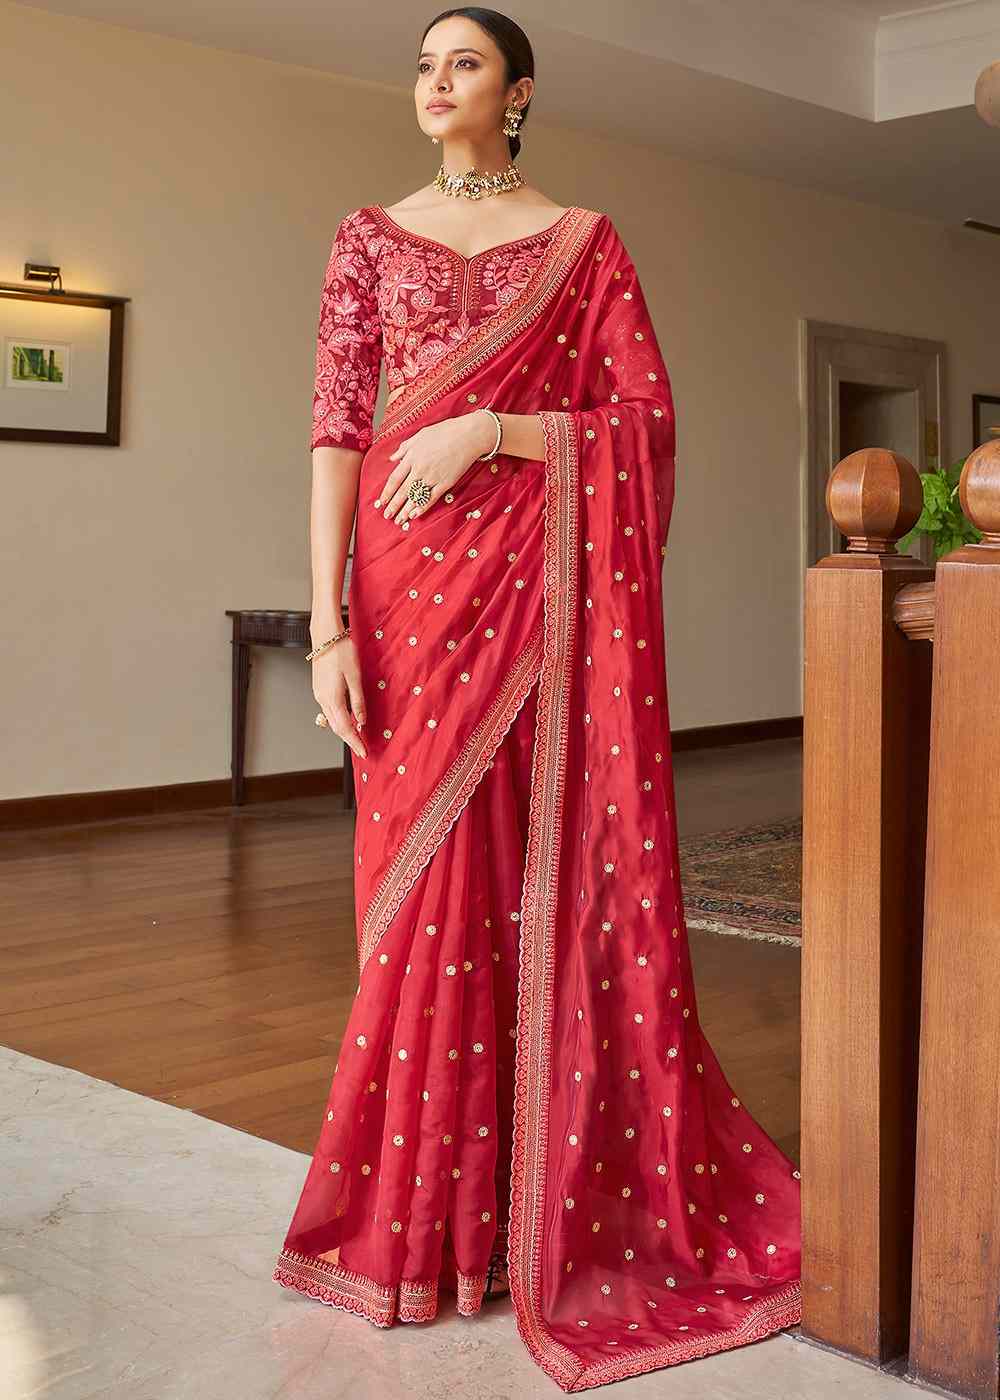 Royal Bridal Look with Solid Colored Silk Sarees